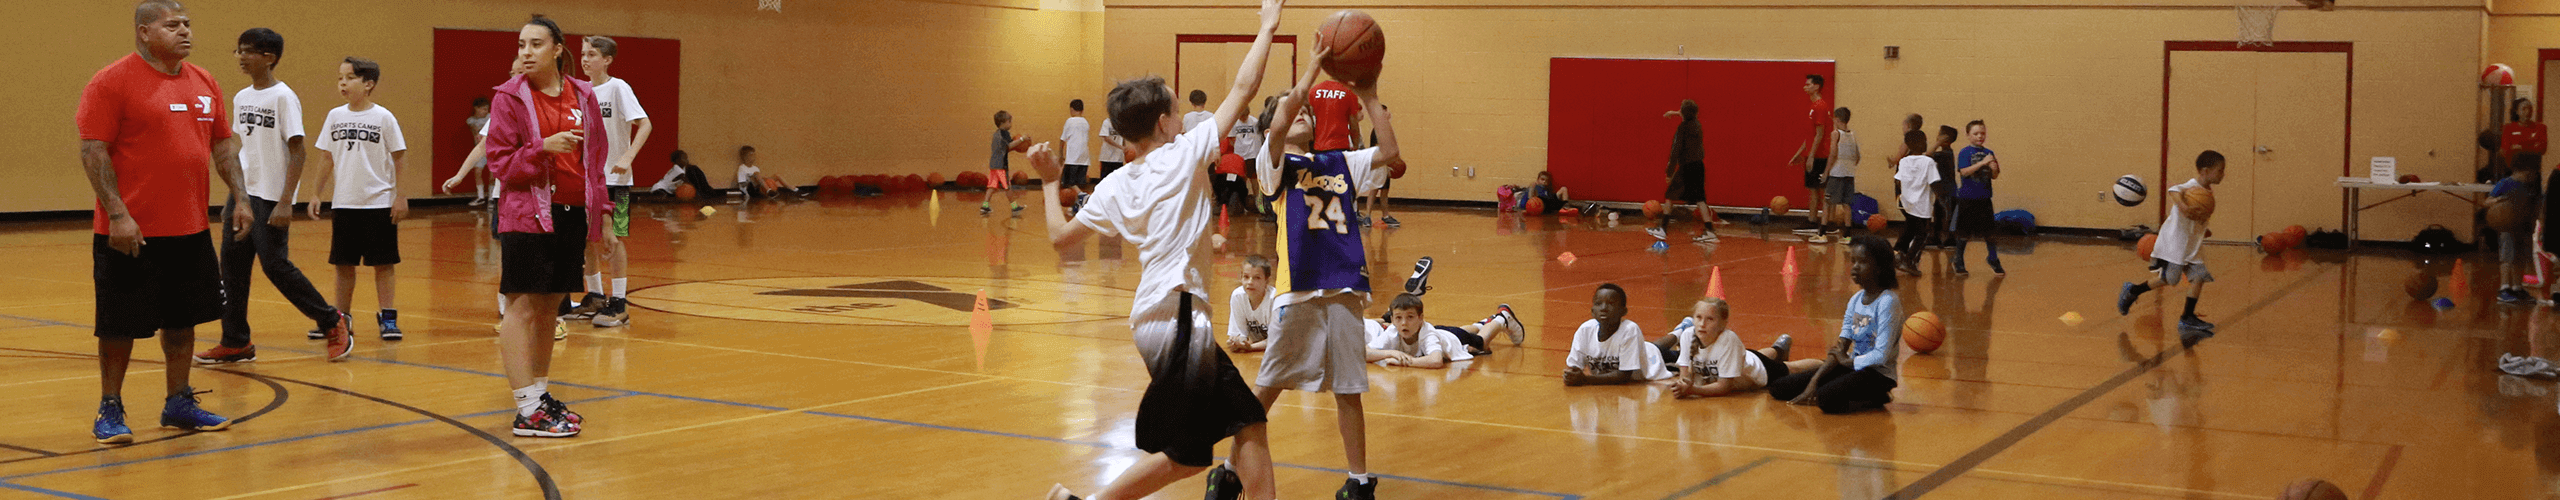 Group of children playing basketball in a gym